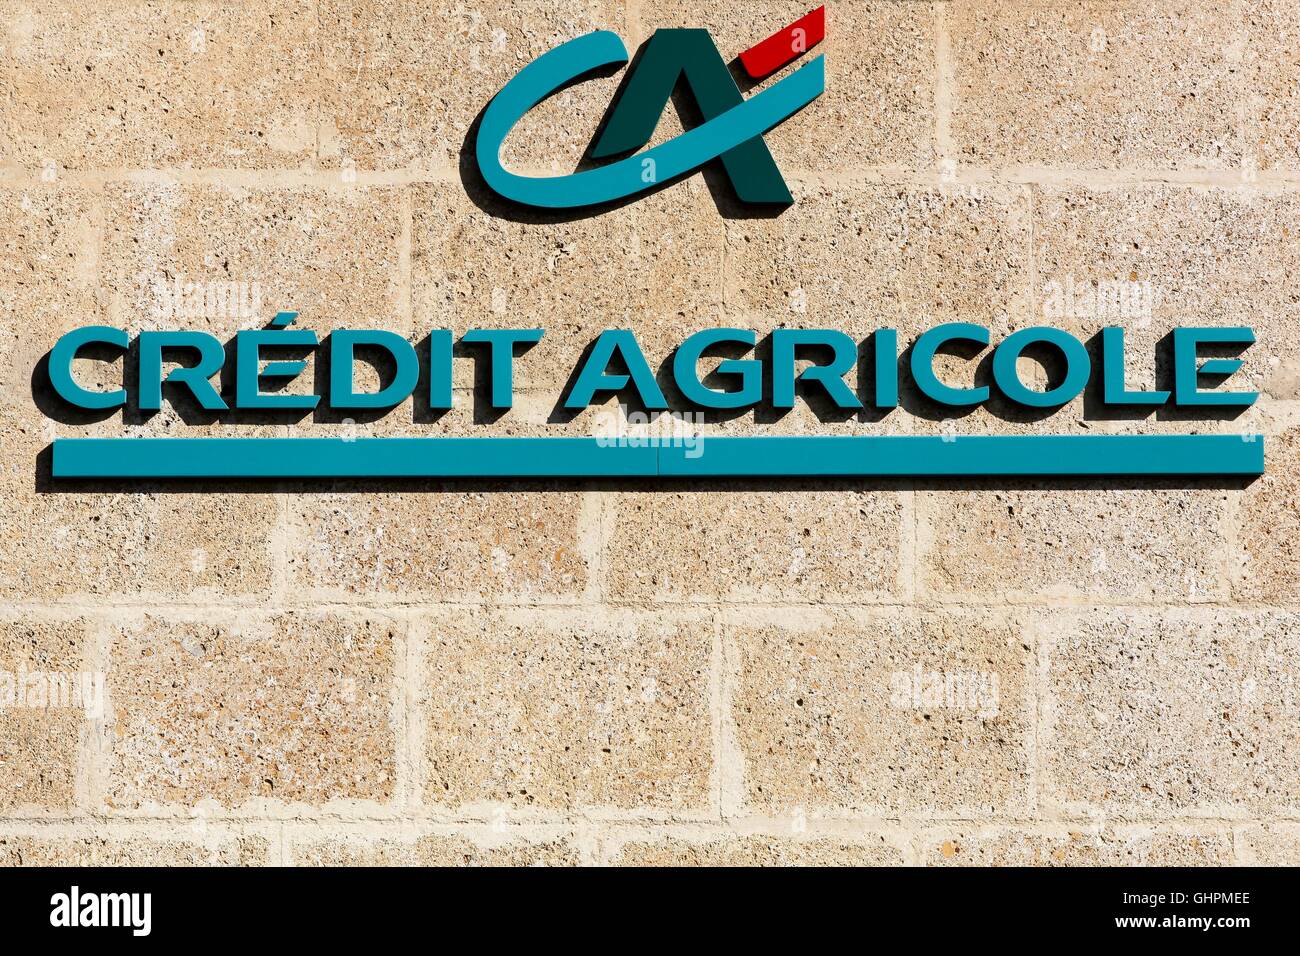 Credit Agricole logo on a wall Stock Photo